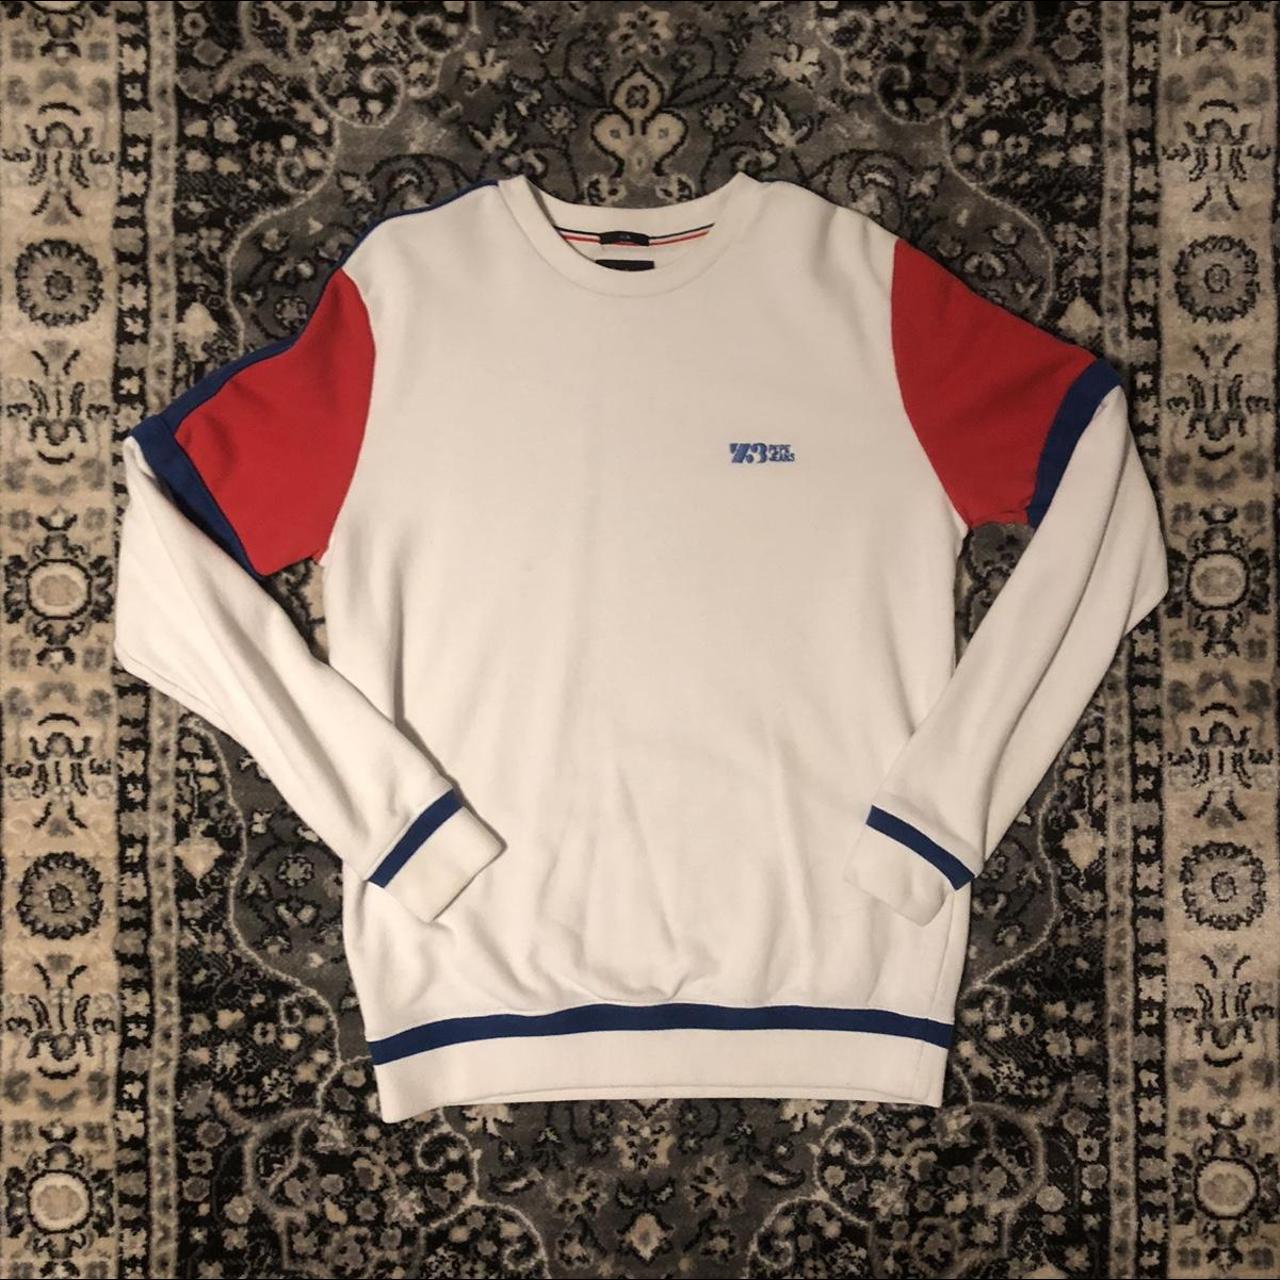 Pepe Jeans Men's White and Blue Hoodie